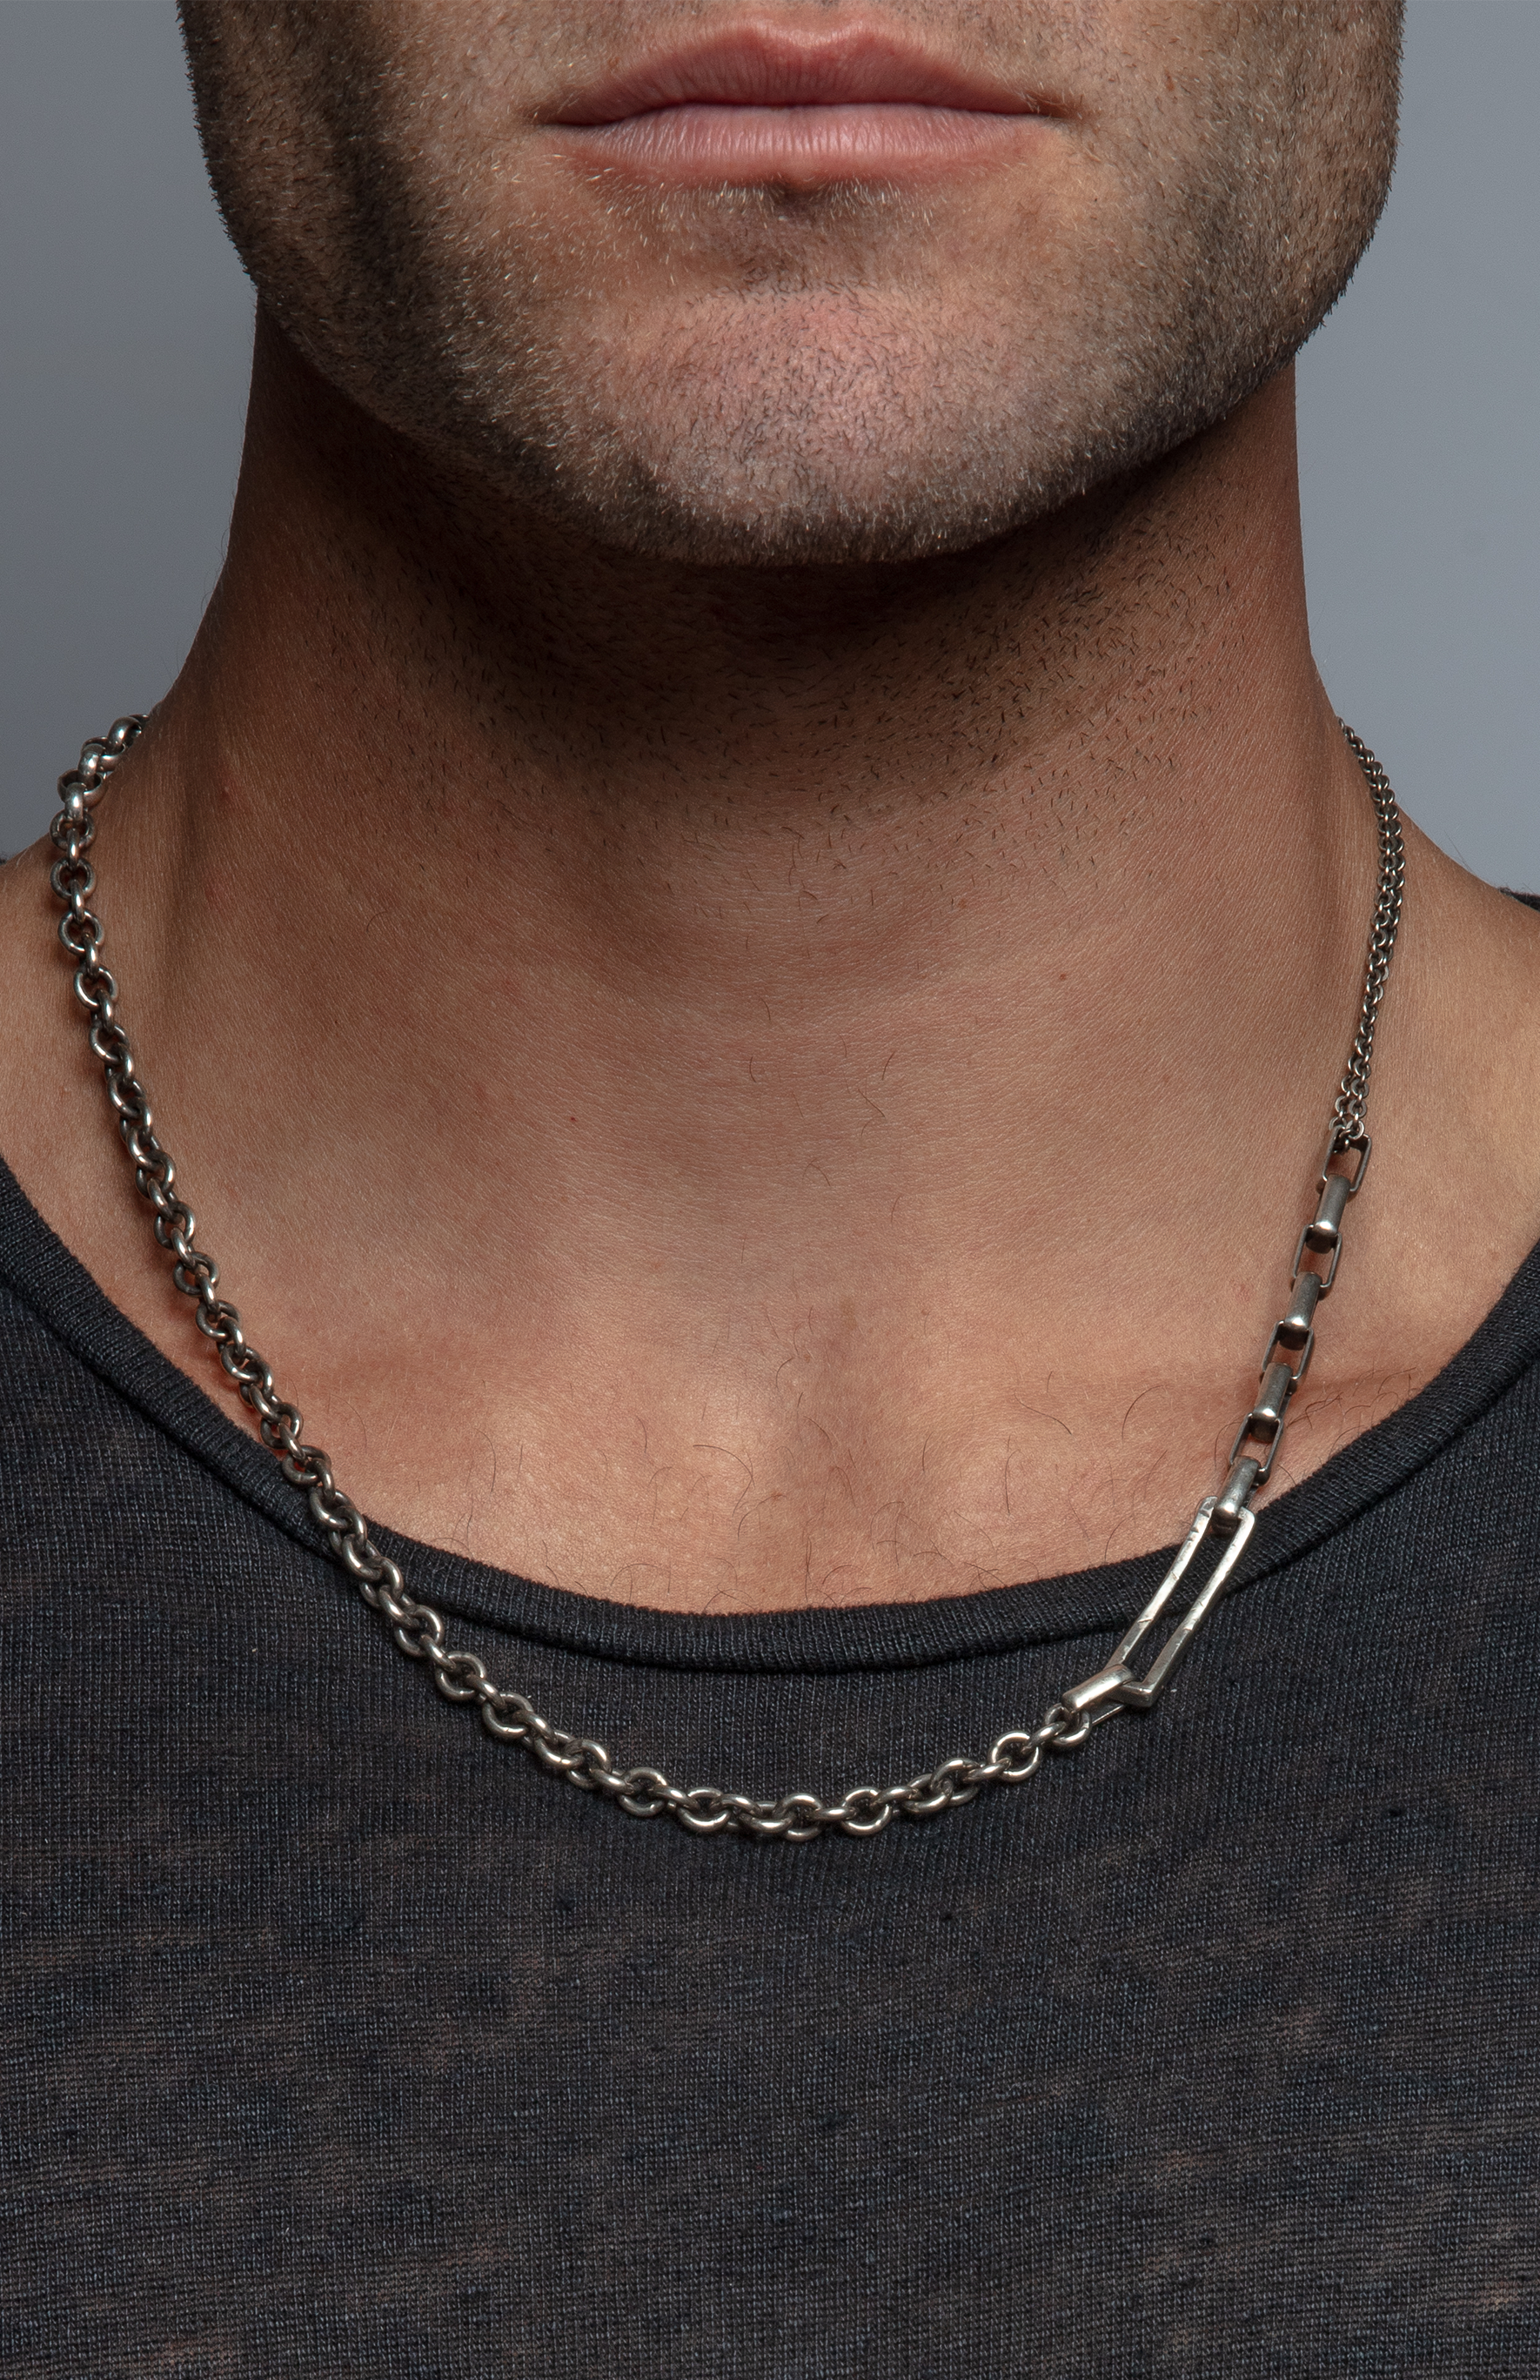 MIXED CHAIN / DISTRESSED BAR NECKLACE 187